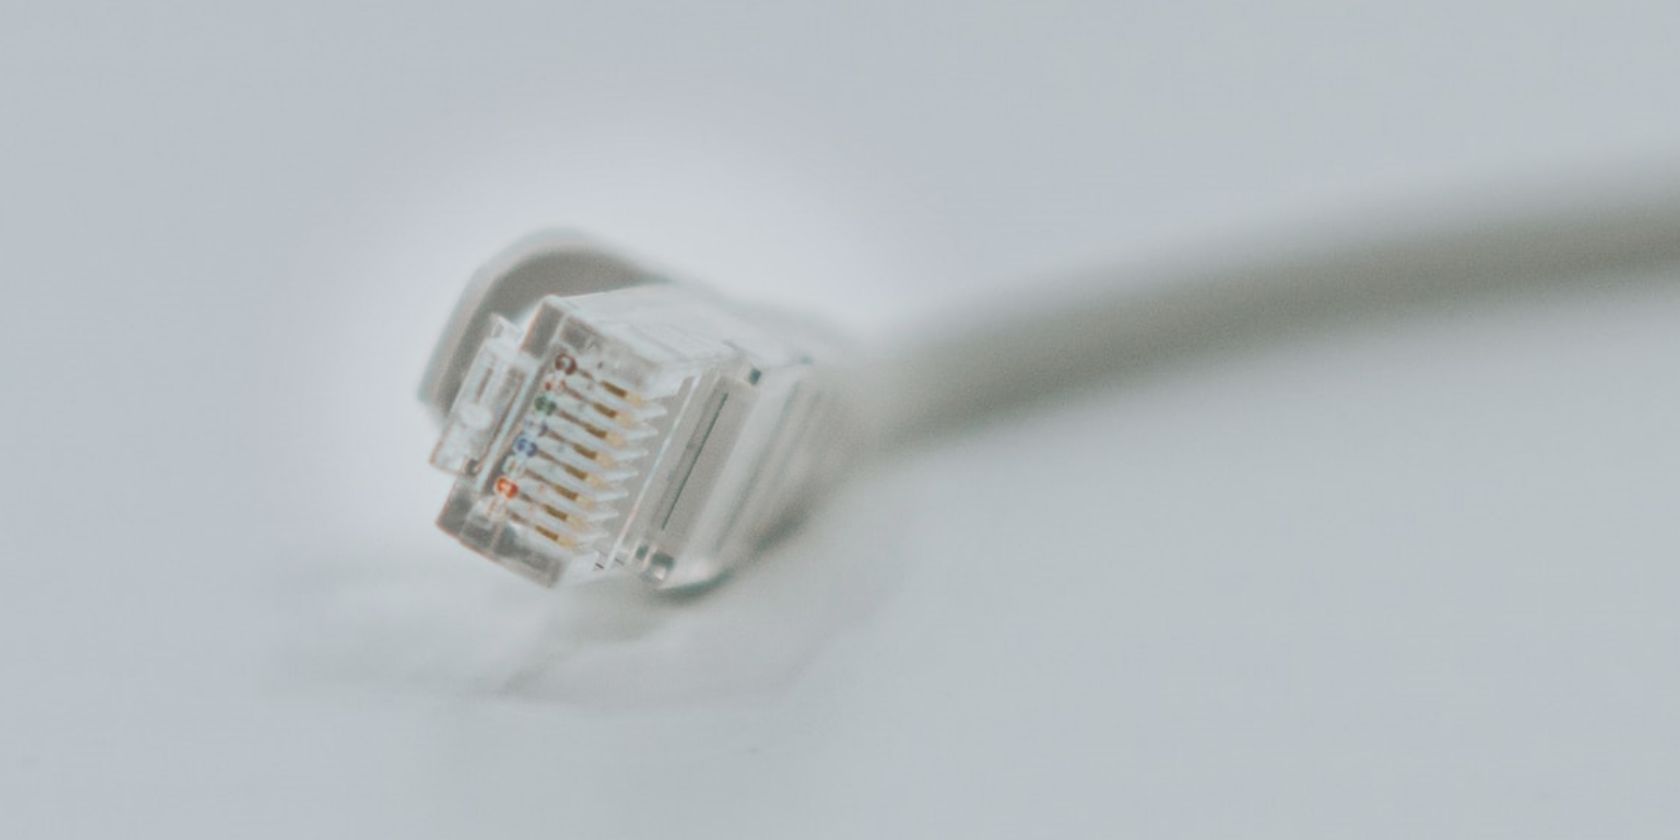 Wire A Cat6 Cable With This Wiring Diagram